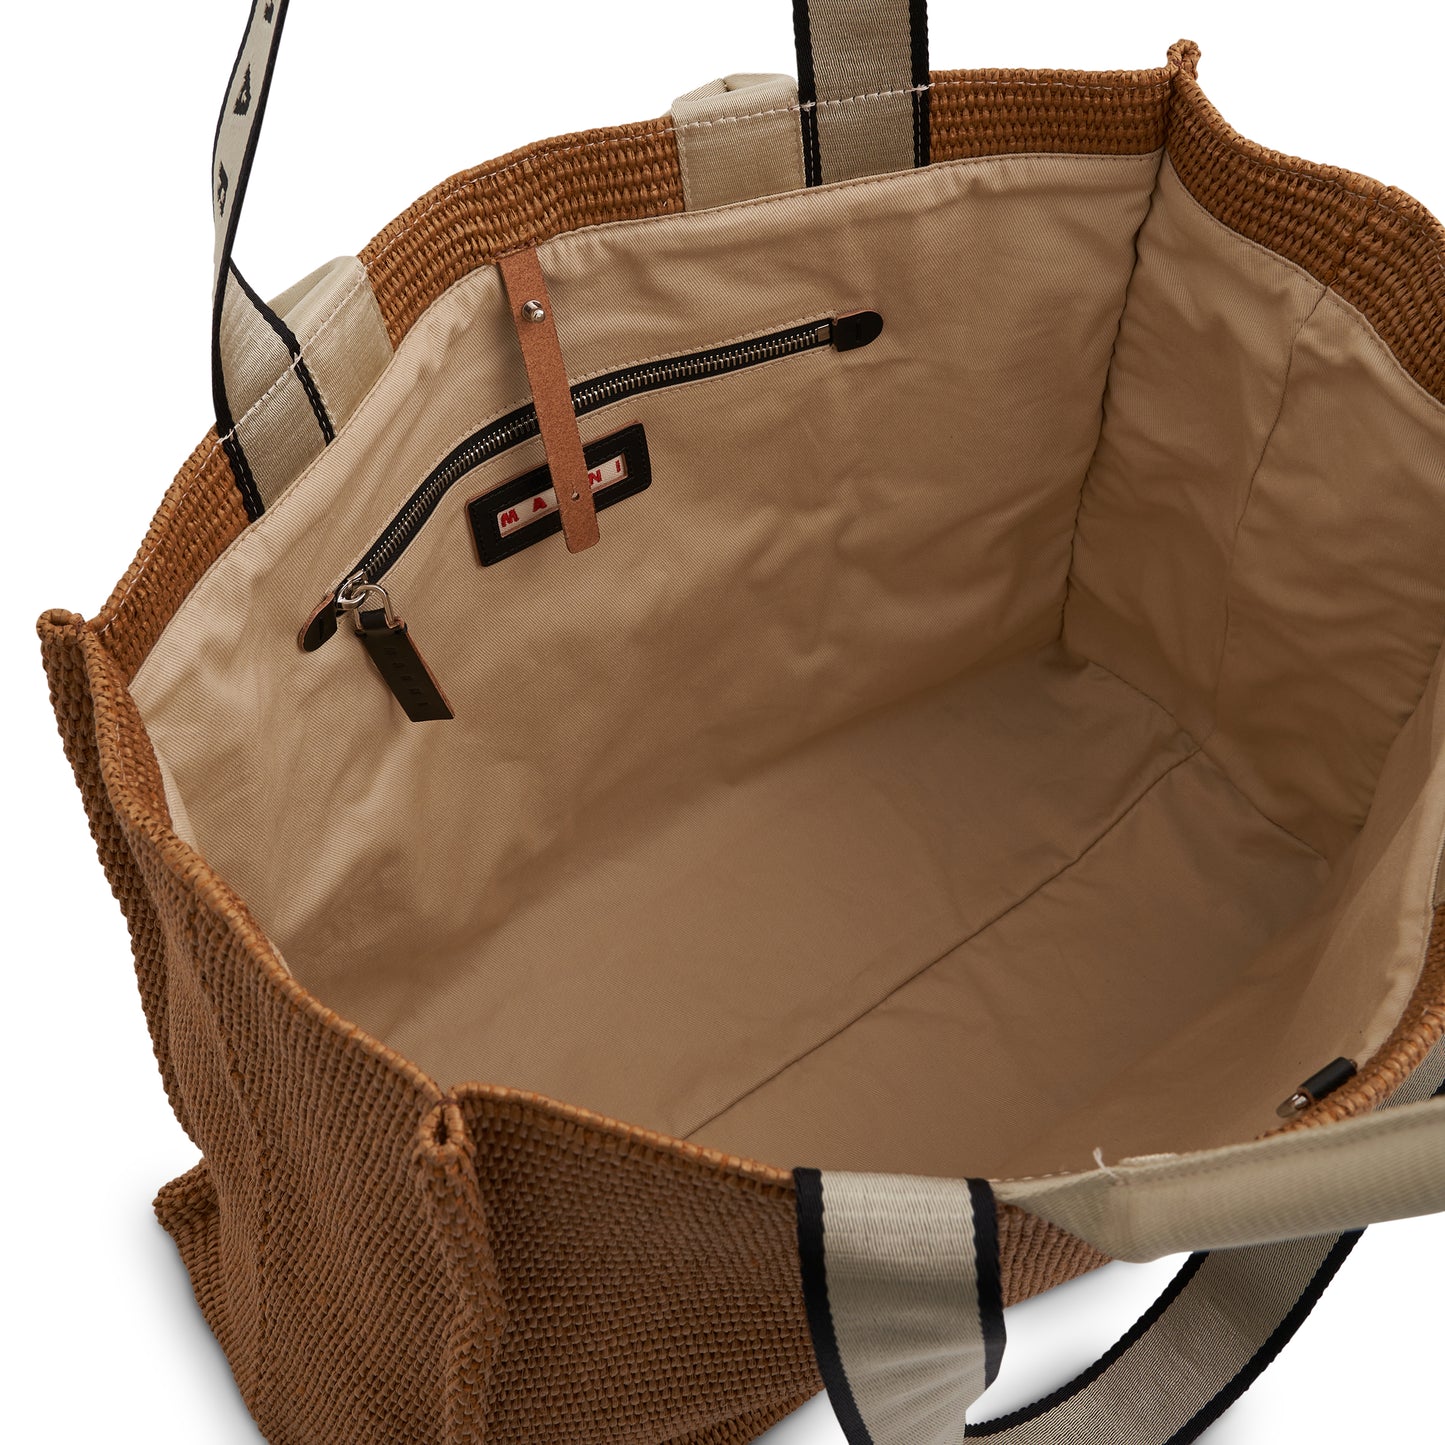 East West Tote Bag in Raw Sienna/Natural